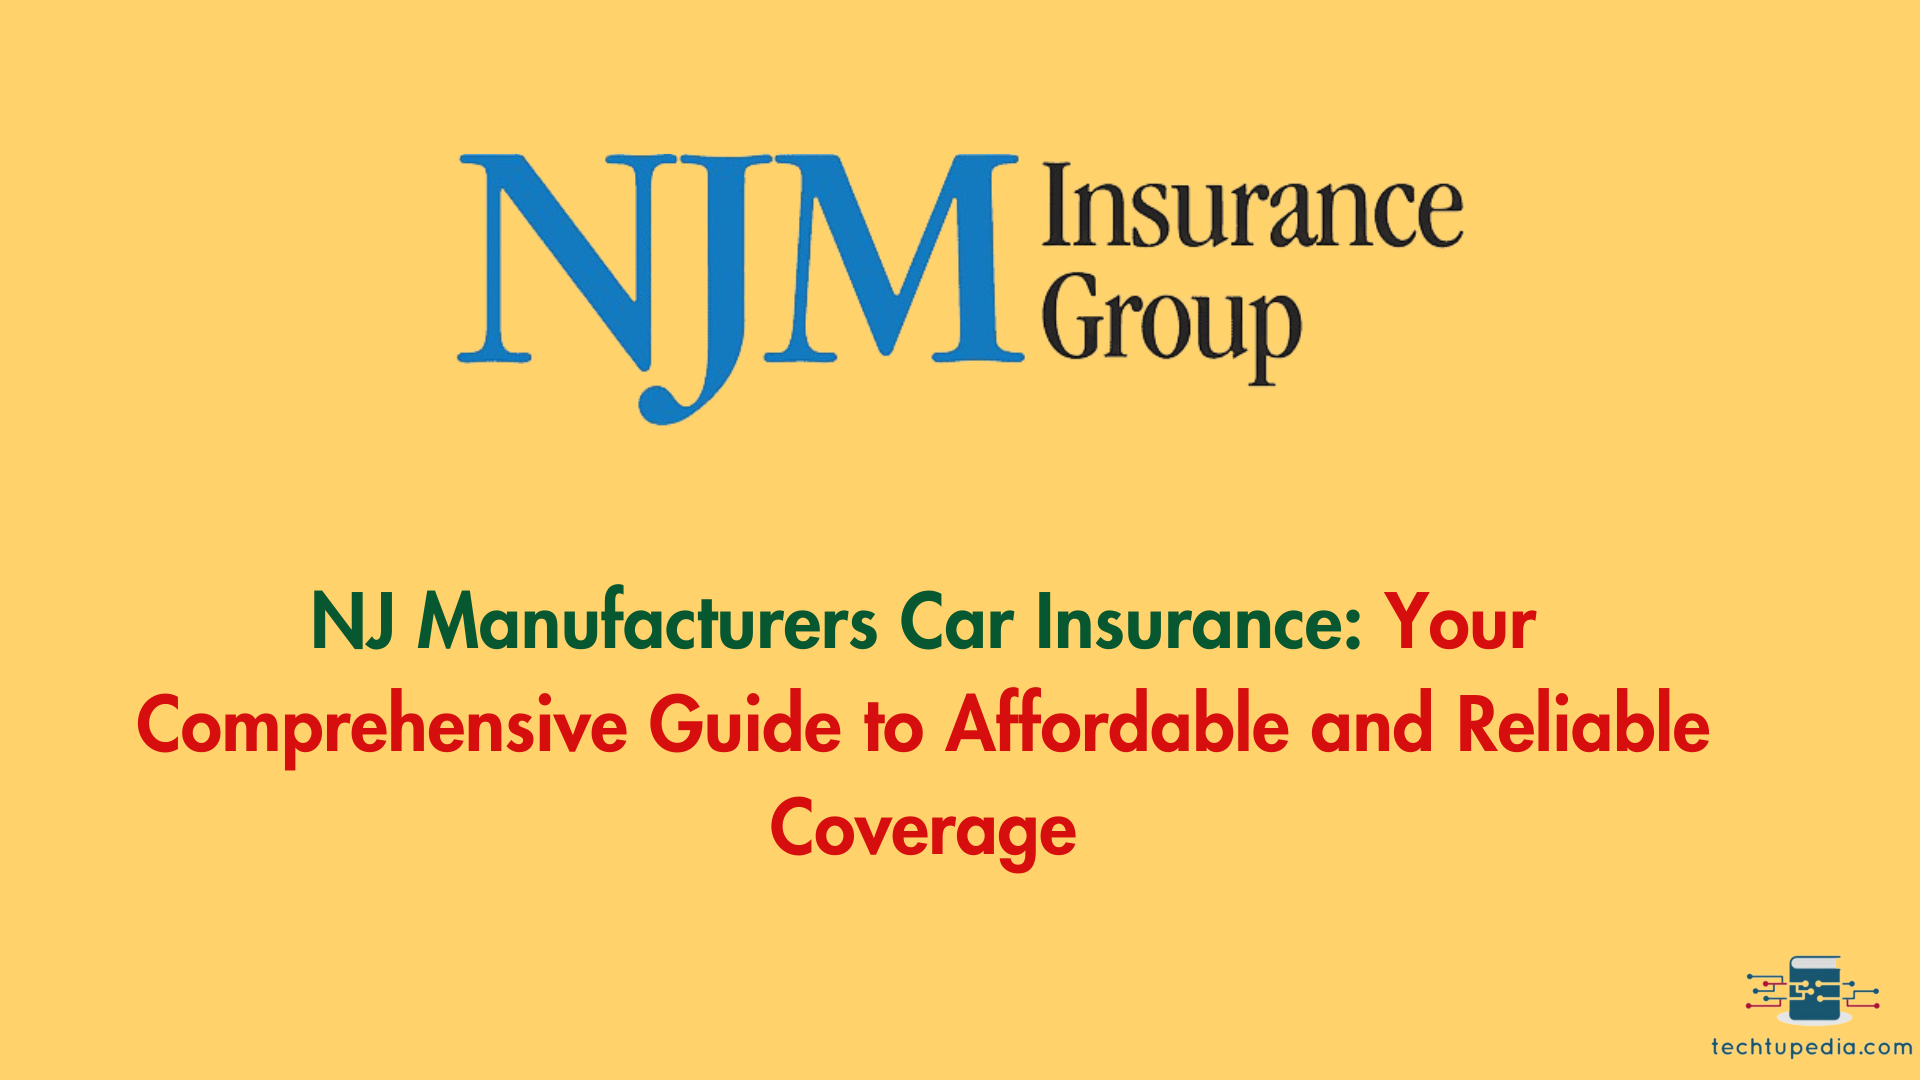 NJ Manufacturers Car Insurance: Your Comprehensive Guide to Affordable and Reliable Coverage